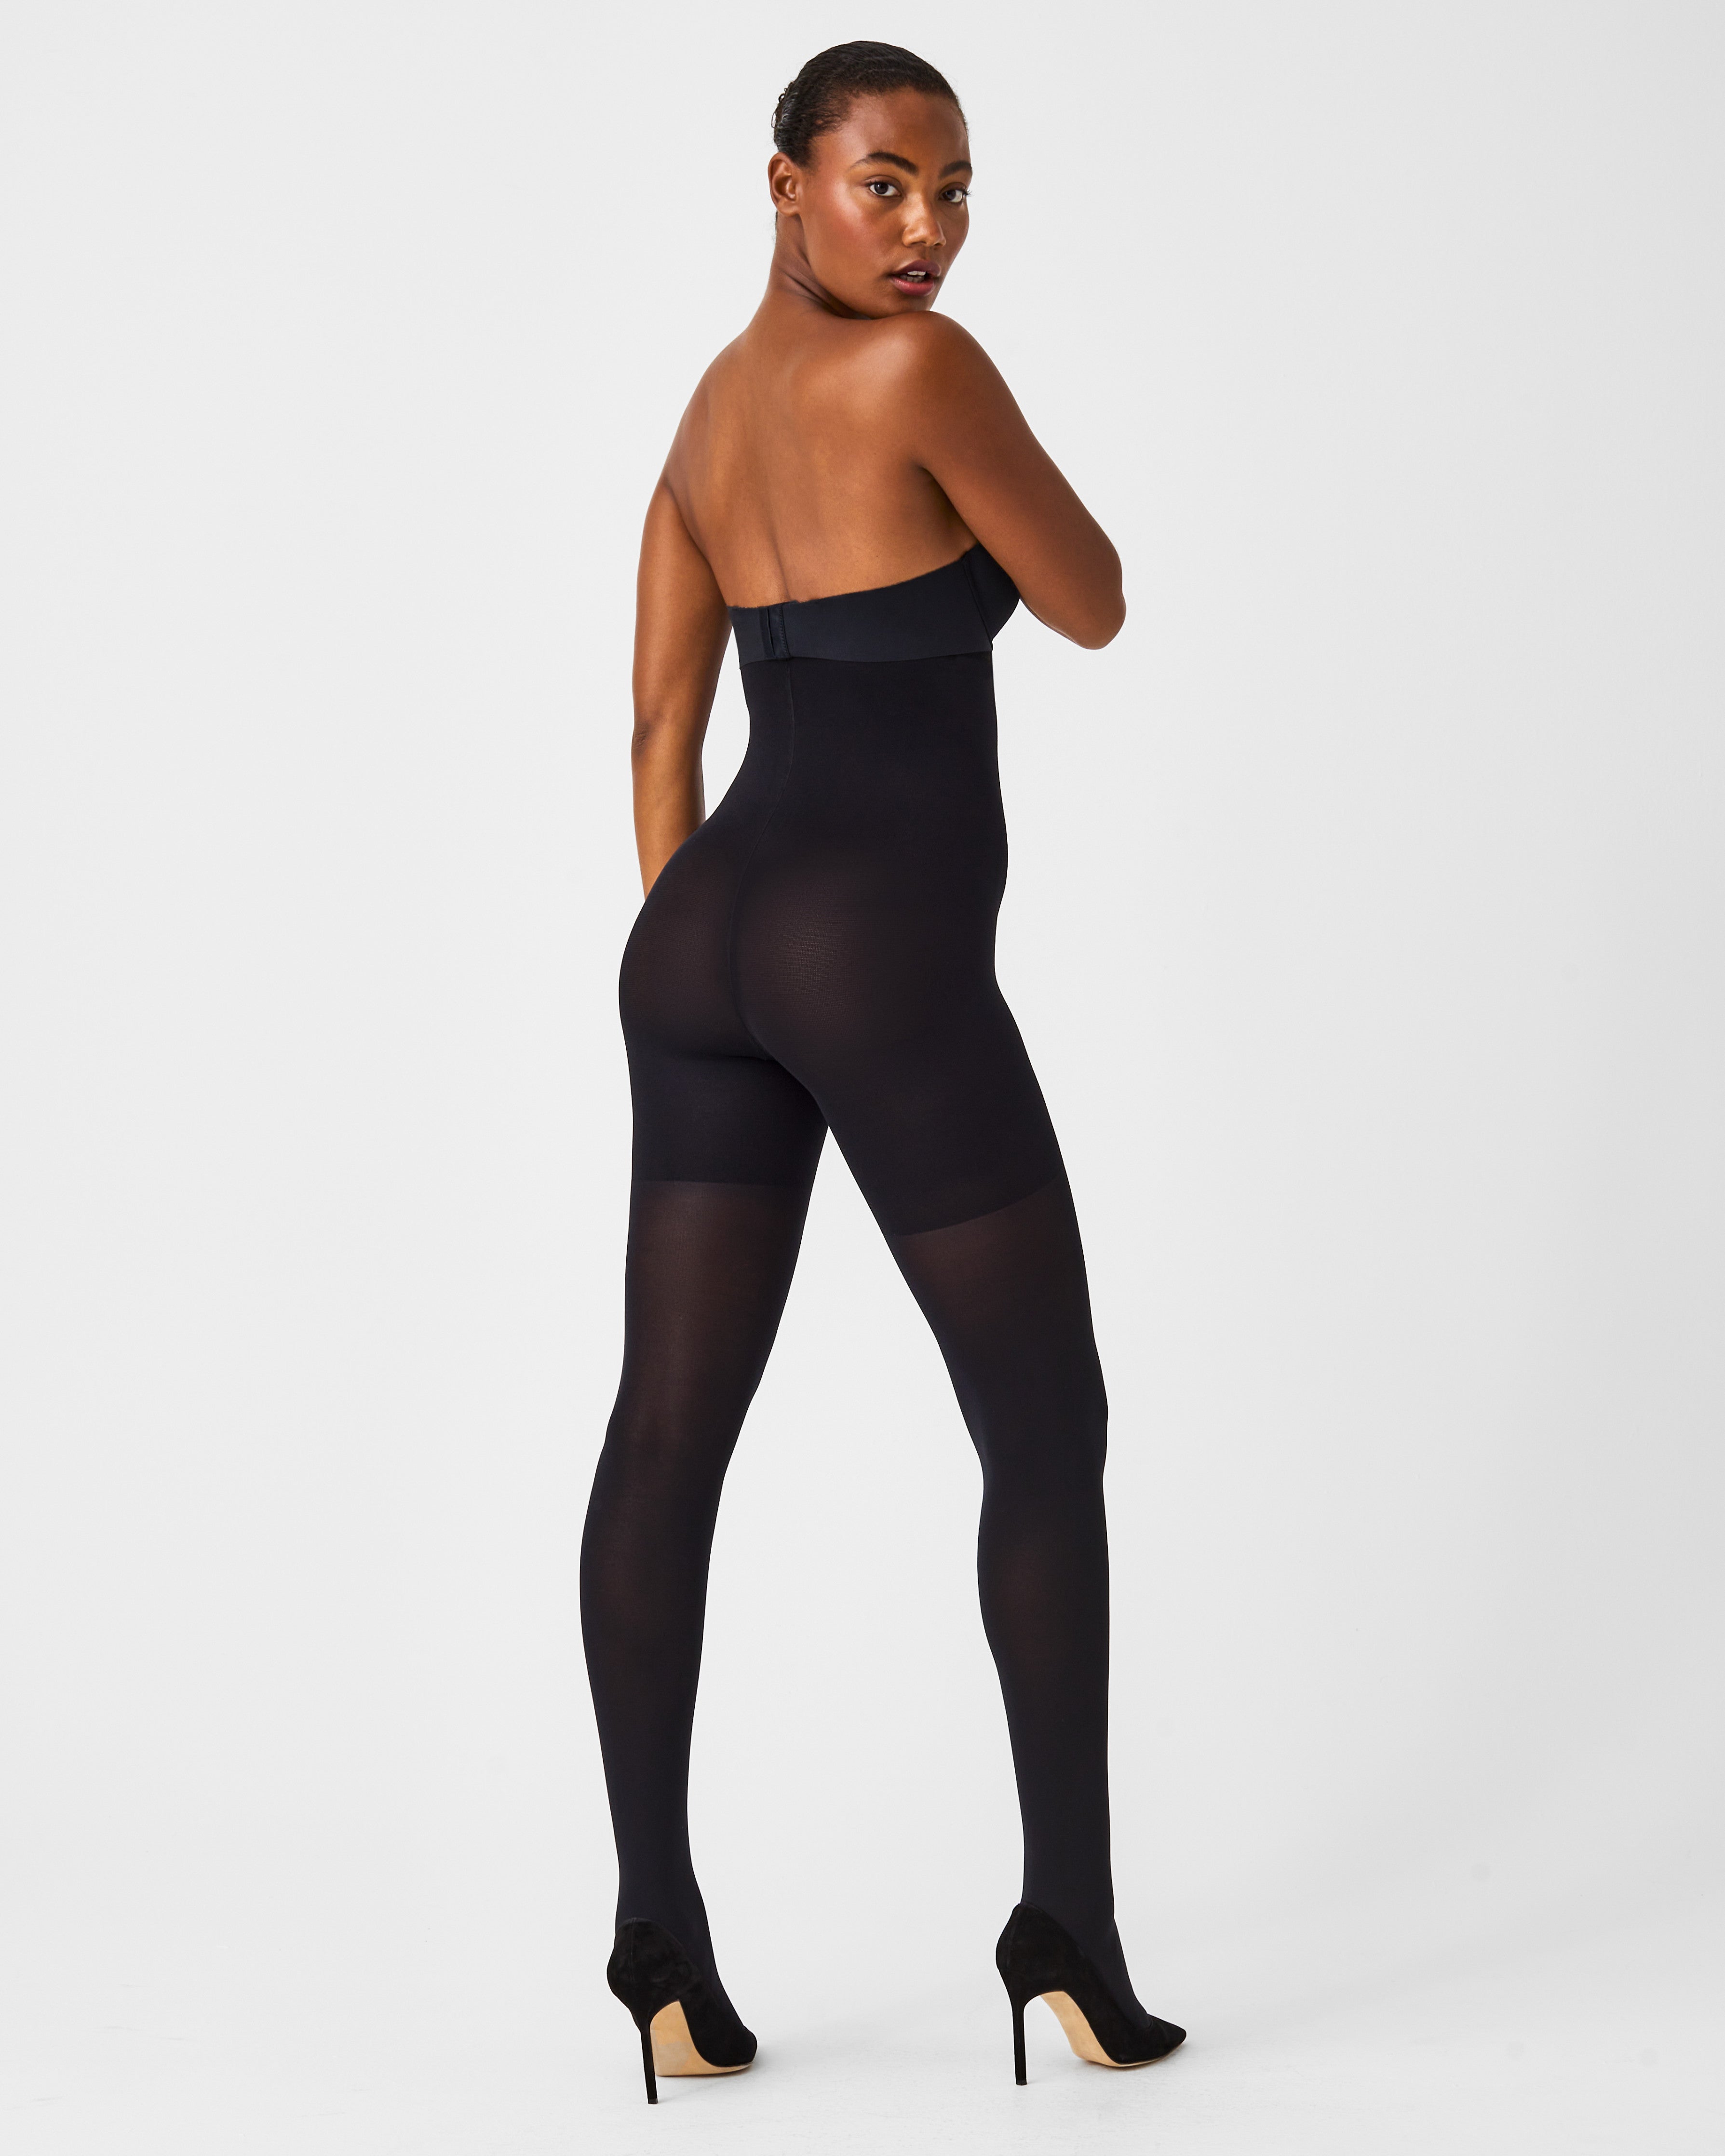 Buy Spanx women updown tight end tights black Online